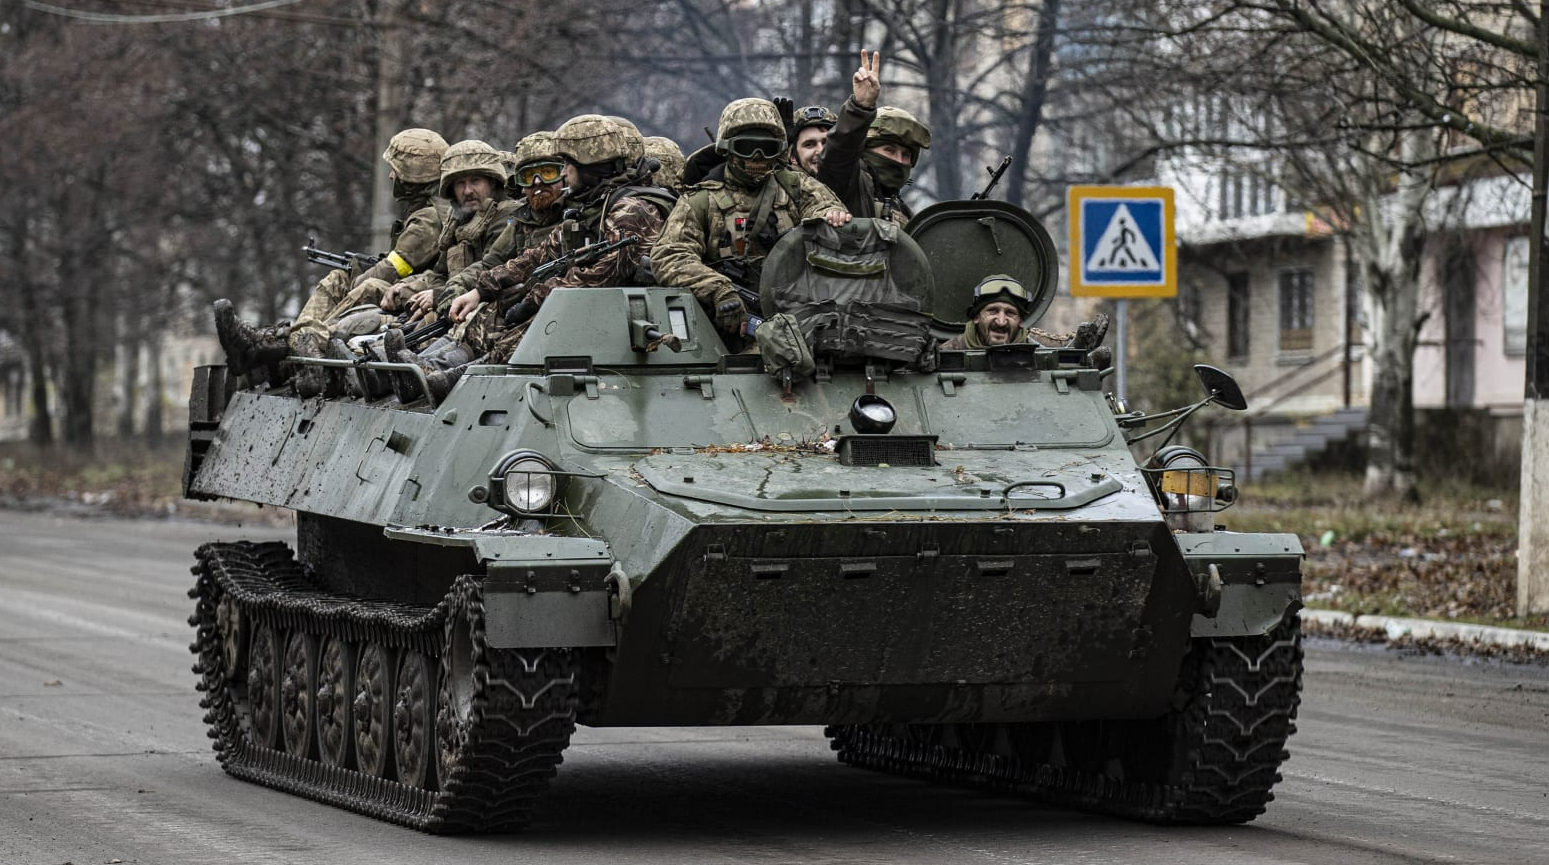 An army tank during the Russia-Ukraine War